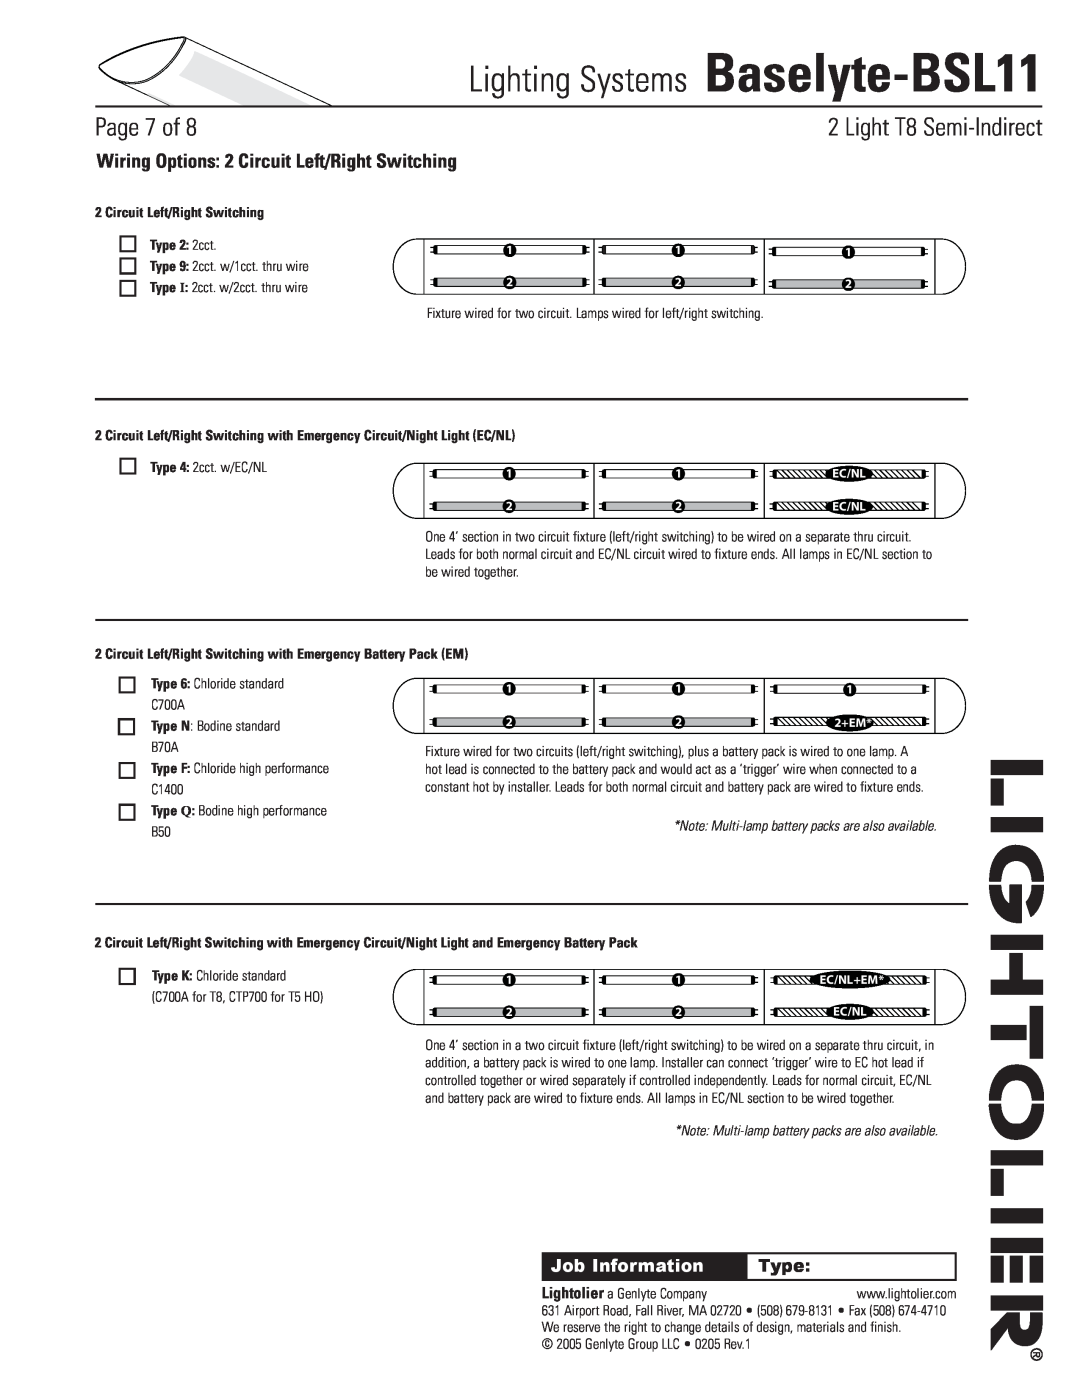 Lightolier Baselyte-BSL11 Wiring Options 2 Circuit Left/Right Switching, Circuit Left/Right Switching Type 2 2cct, Page of 